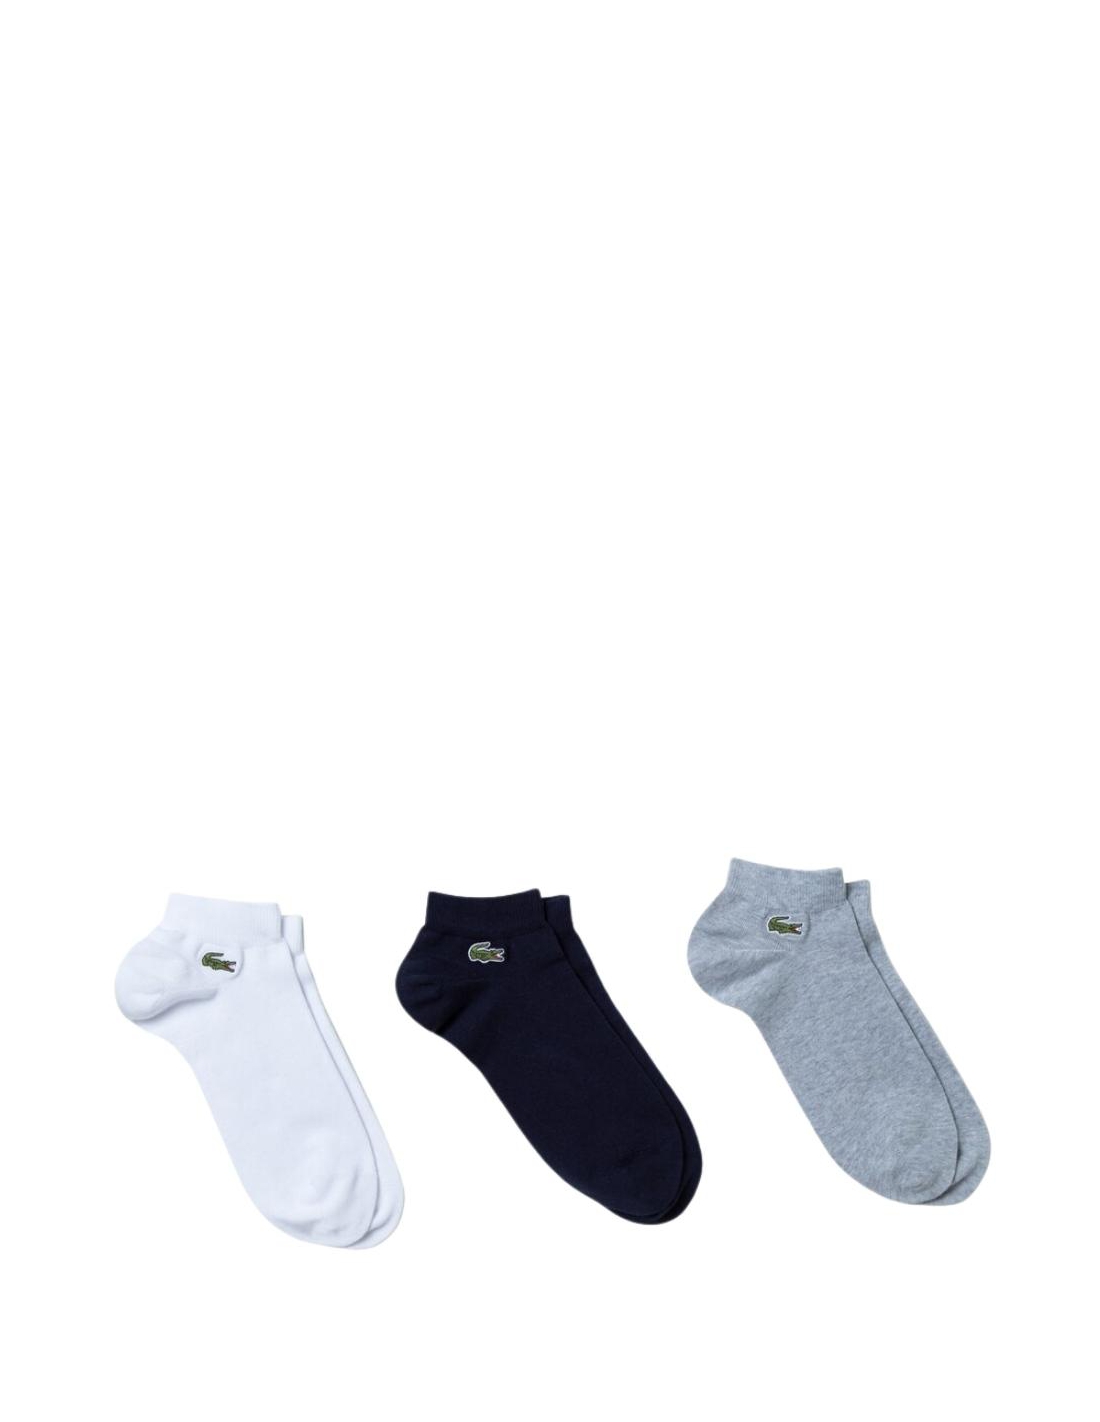 Lacoste Sports 3 Pack Trainer Chaussettes - Blanc/Argent Chine Gris/Marine